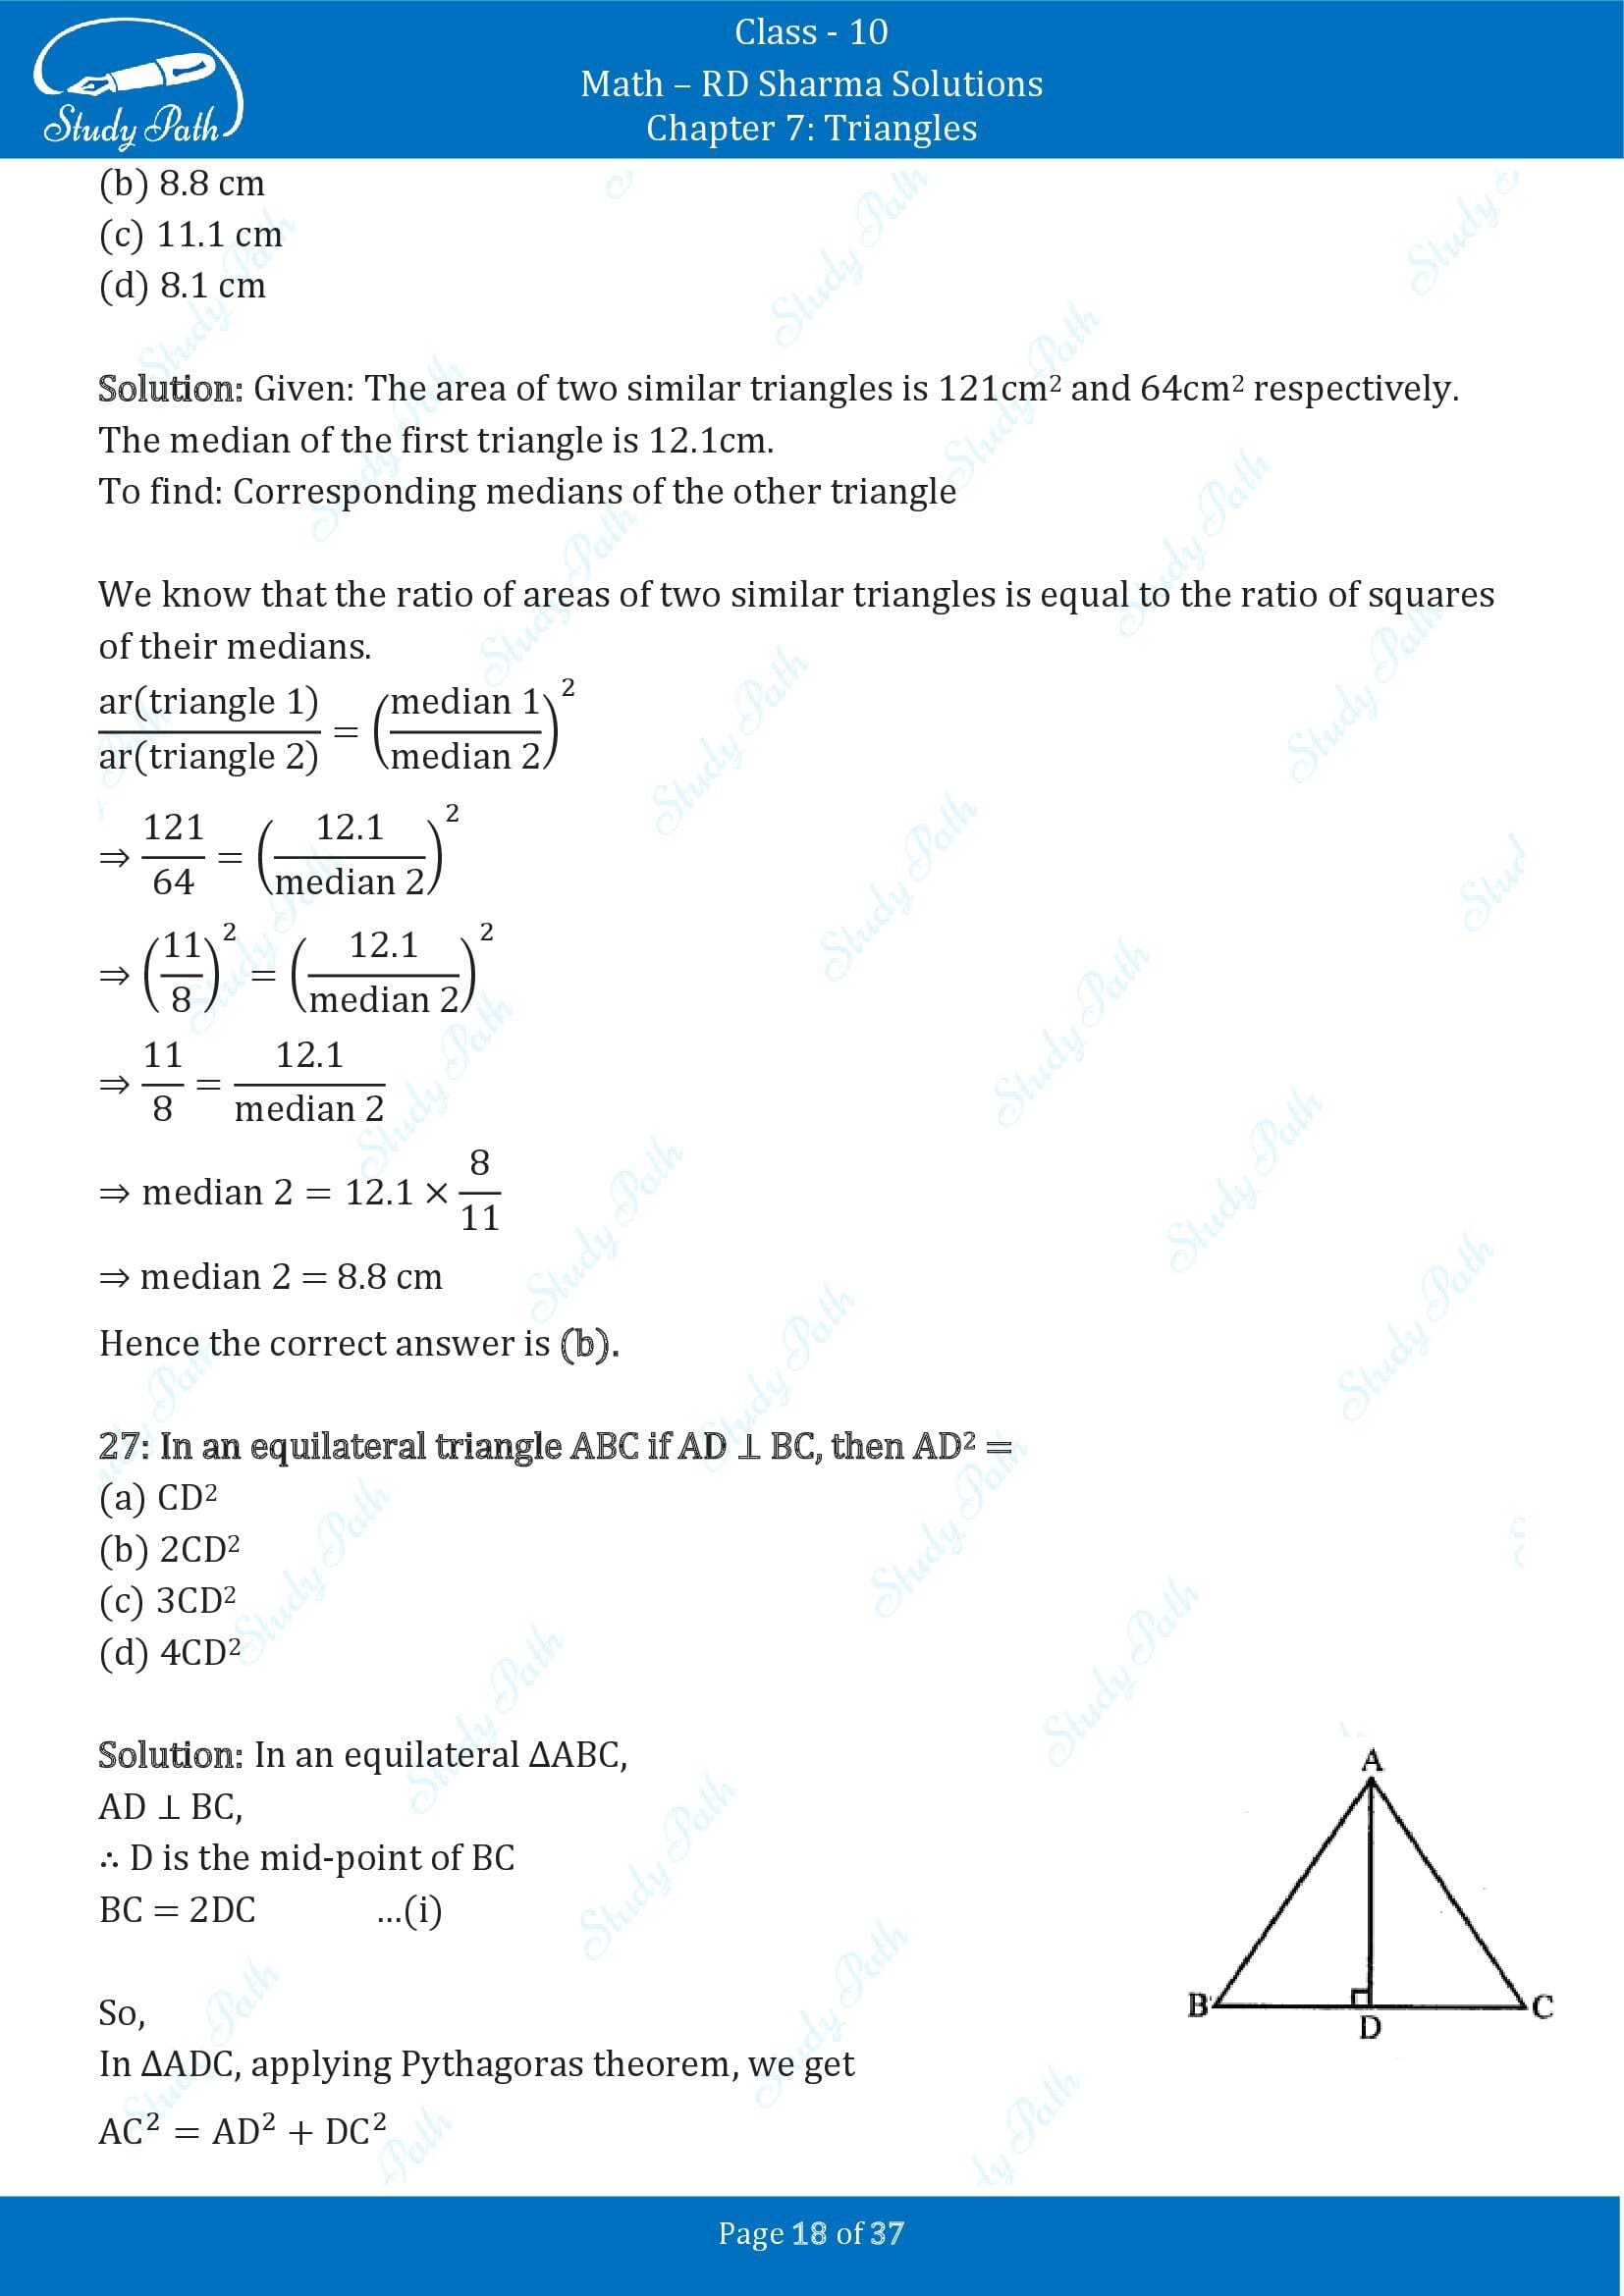 RD Sharma Solutions Class 10 Chapter 7 Triangles Multiple Choice Question MCQs 00018